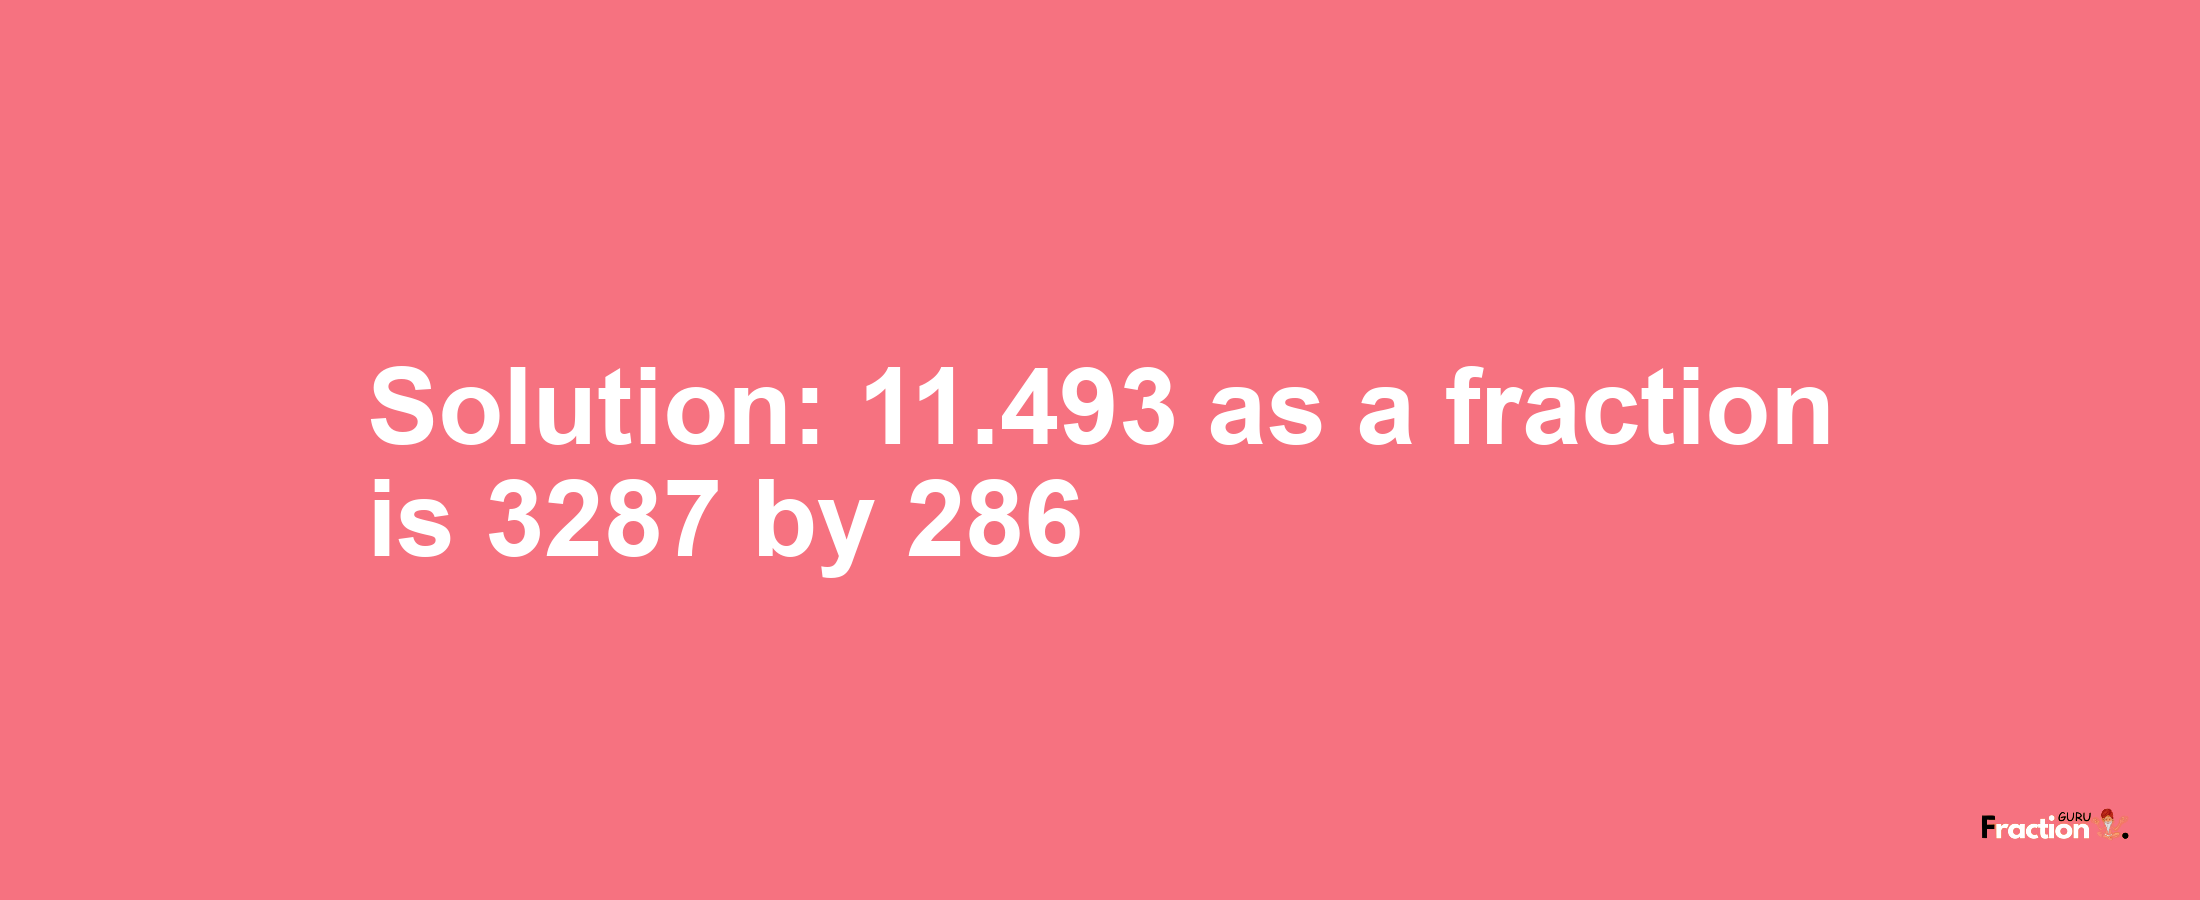 Solution:11.493 as a fraction is 3287/286